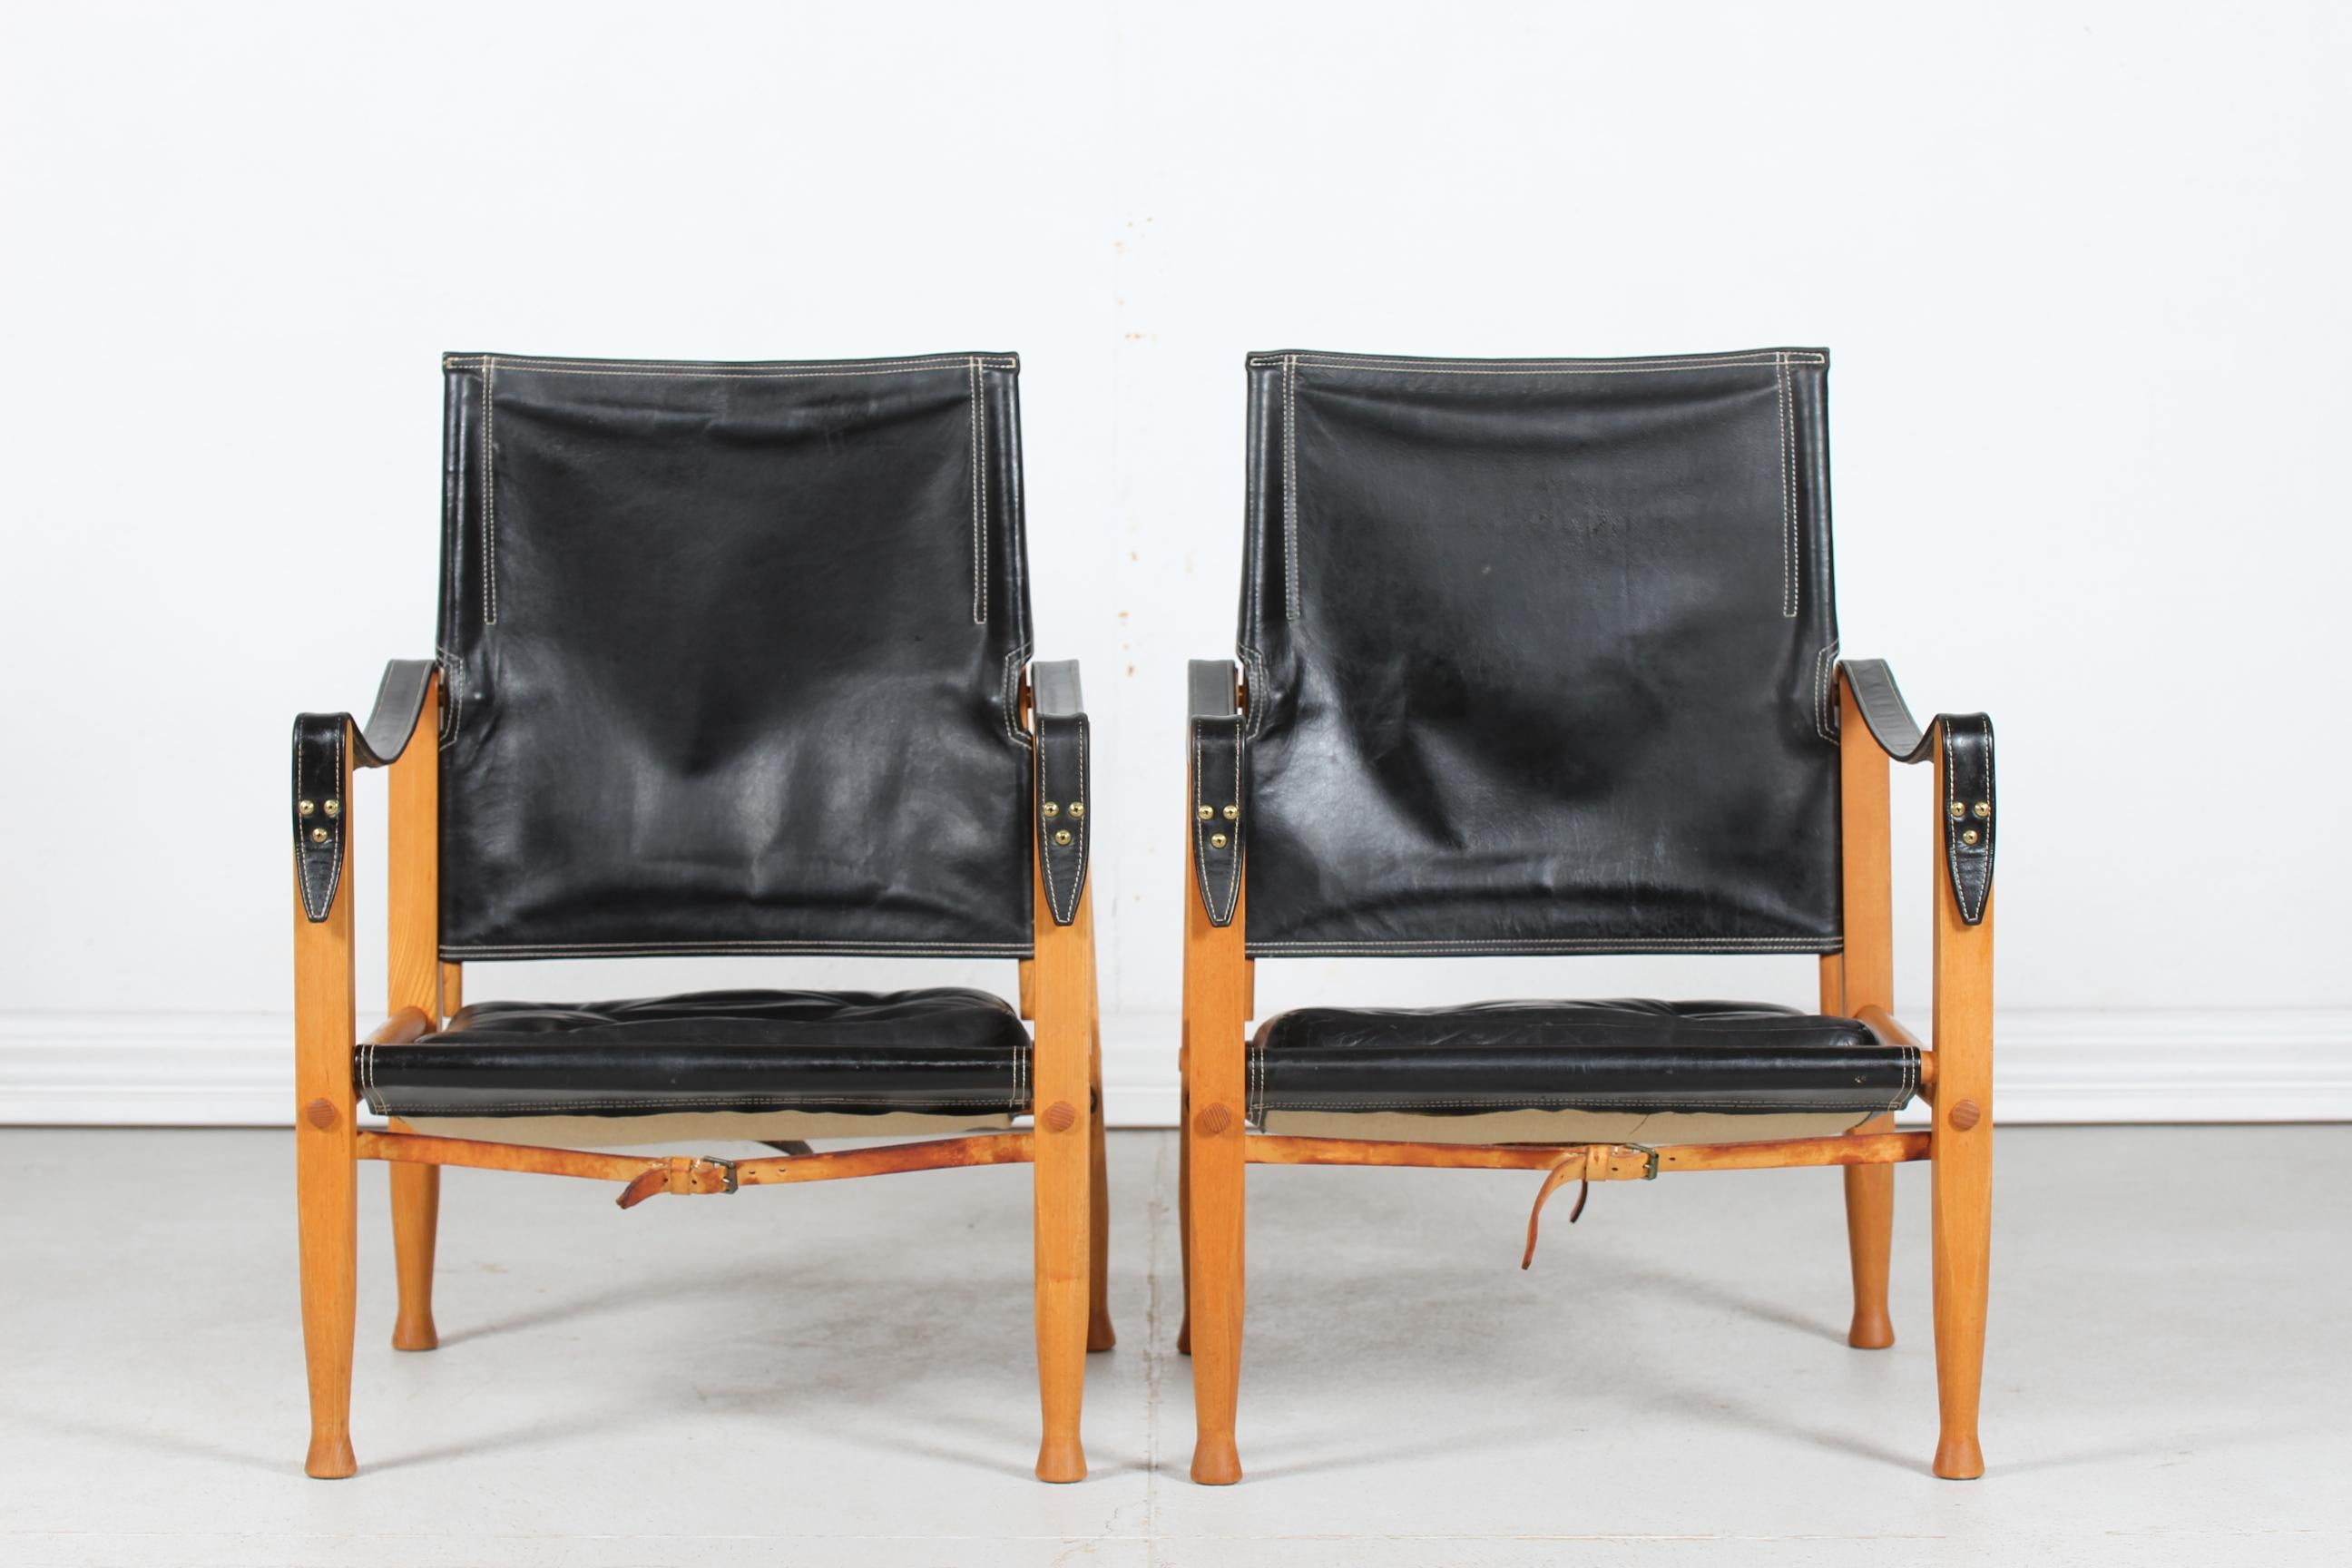 A set of two vintage safari chairs by the Danish architect and furniture designer Kaare Klint (1888-1954) 
Manufactured by cabinetmaker Rud. Rasmussen in Copenhagen.

The frame of the chairs are made of solid ash with cushions and seats of black